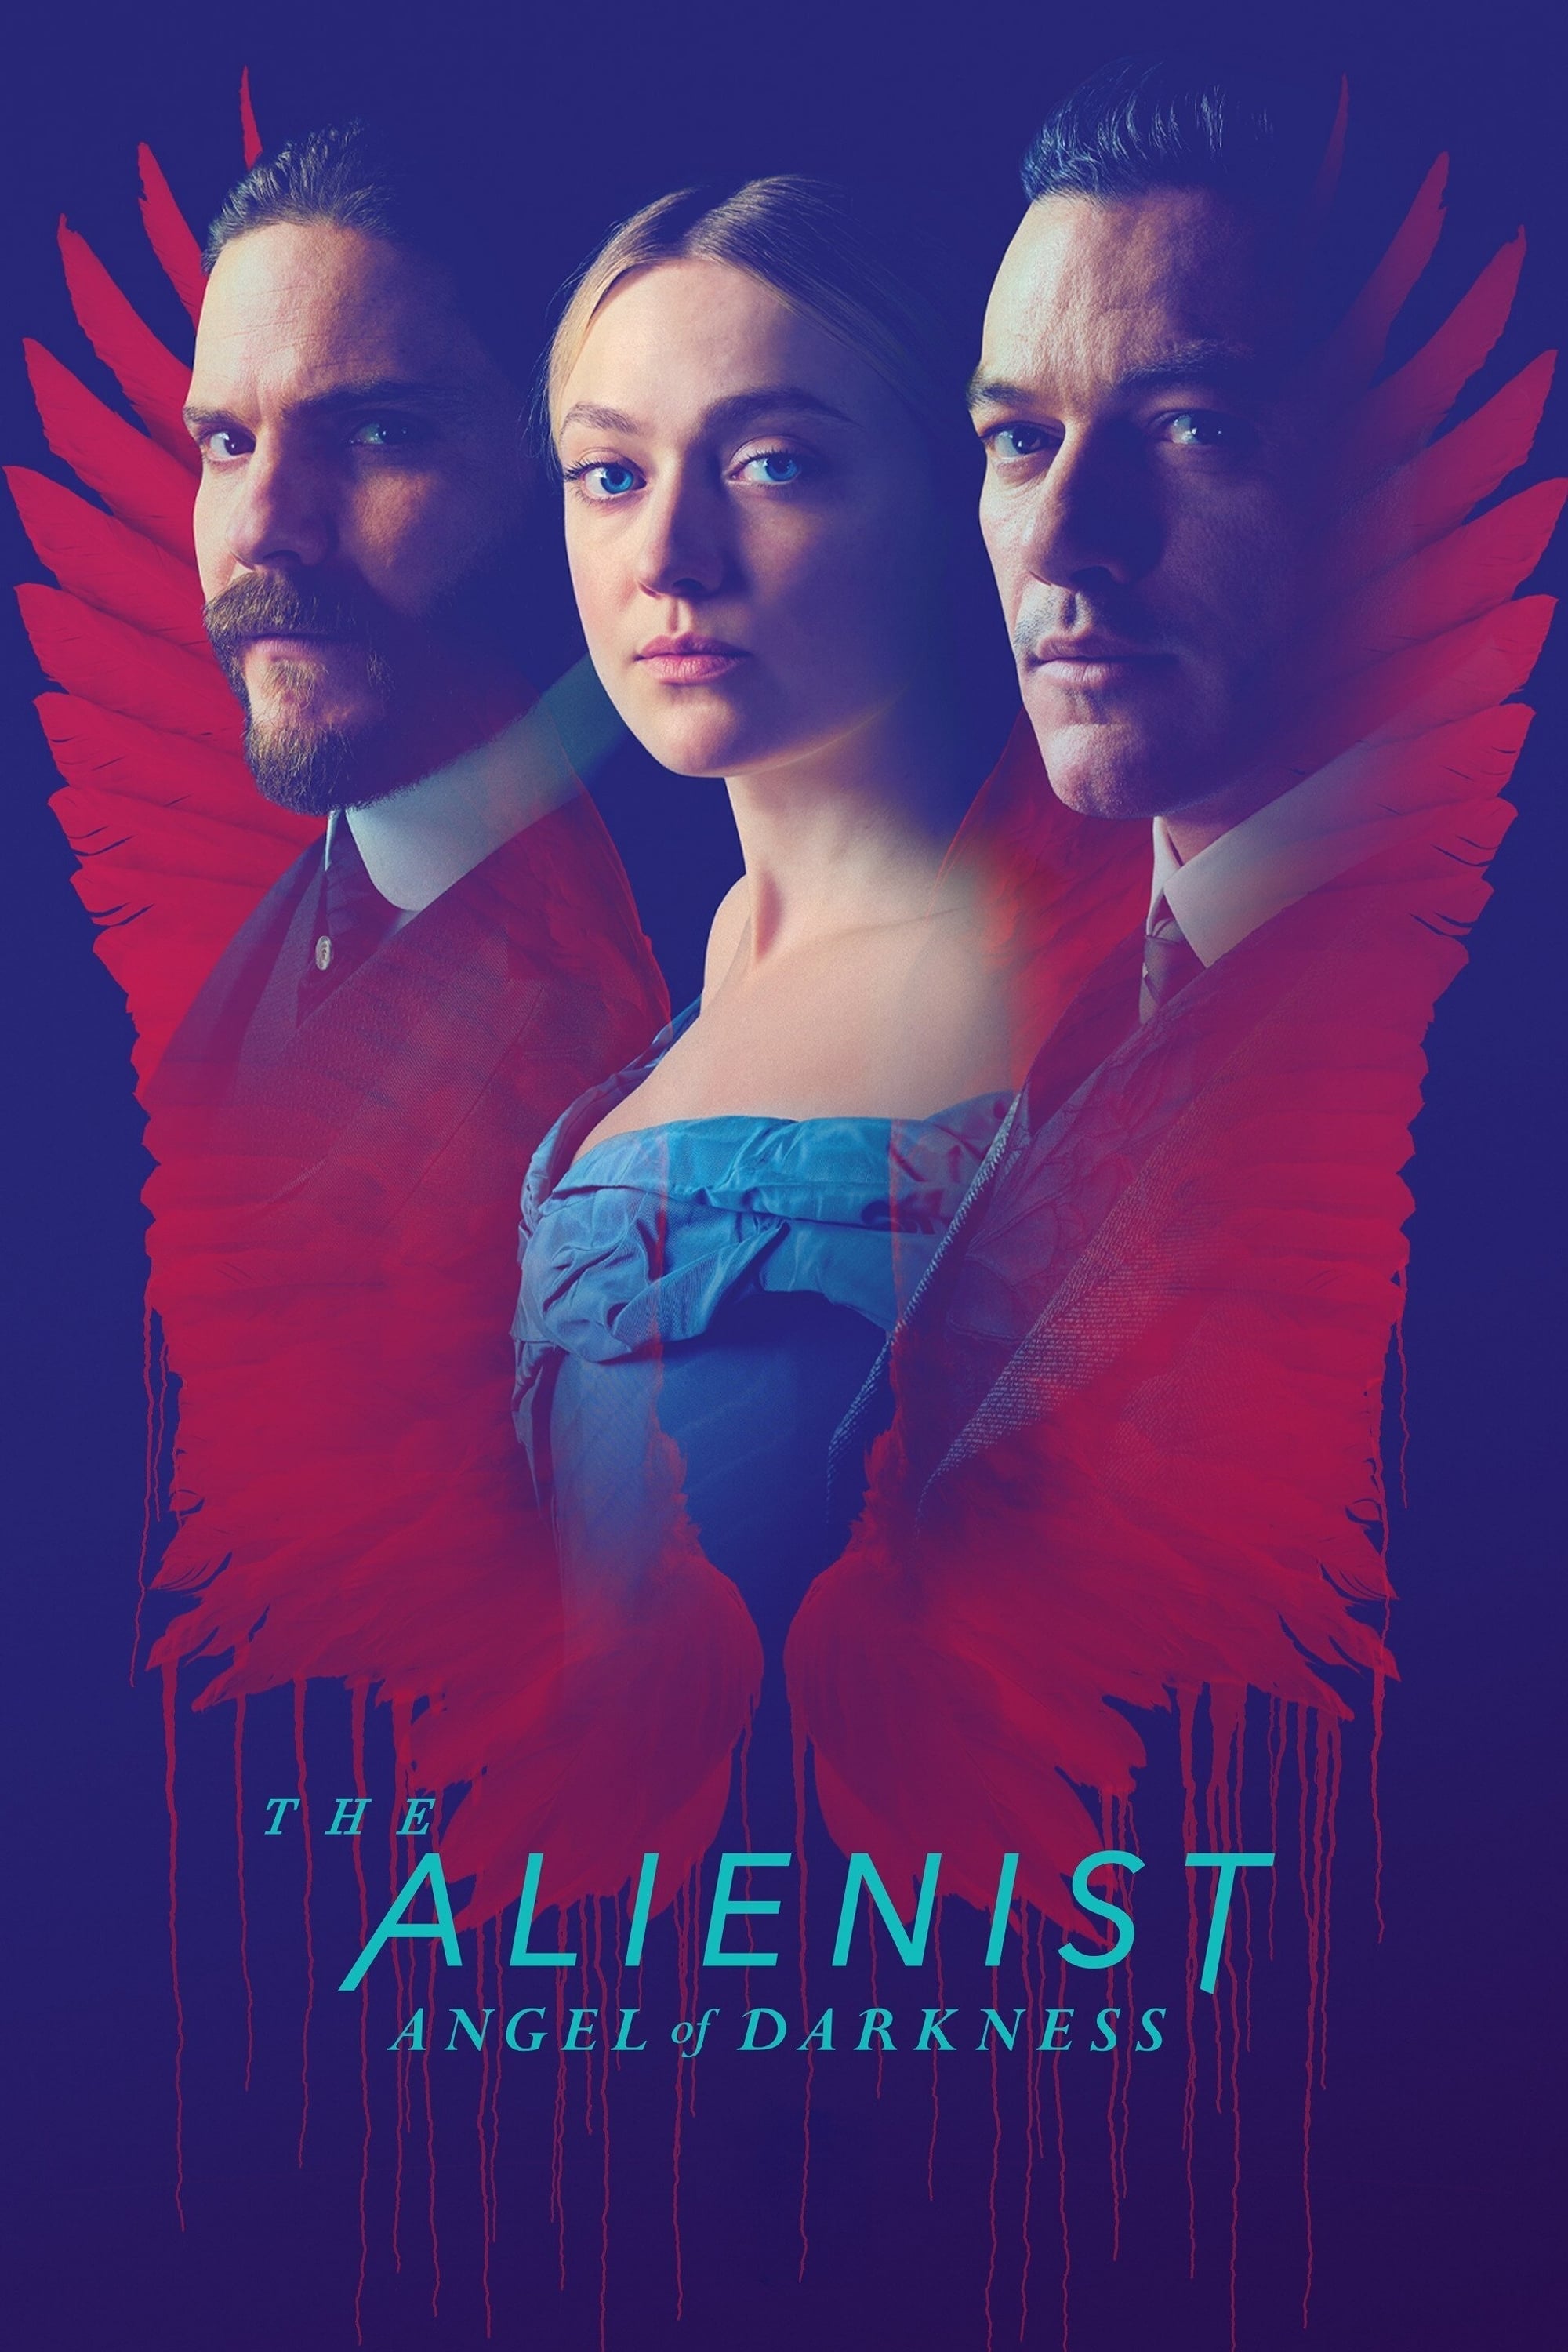 The Alienist rating